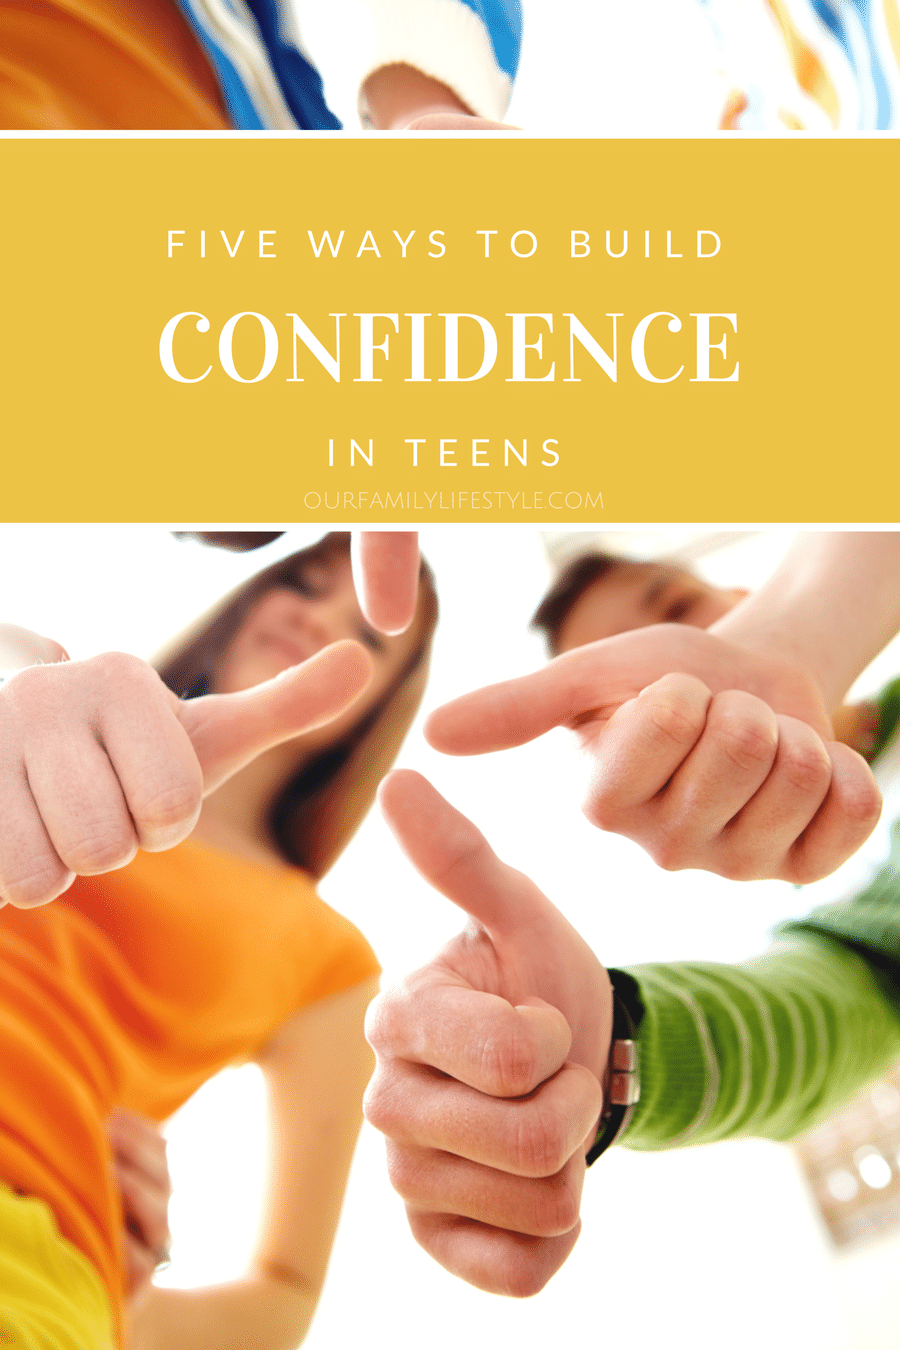 5 Ways to Build Confidence in Teens